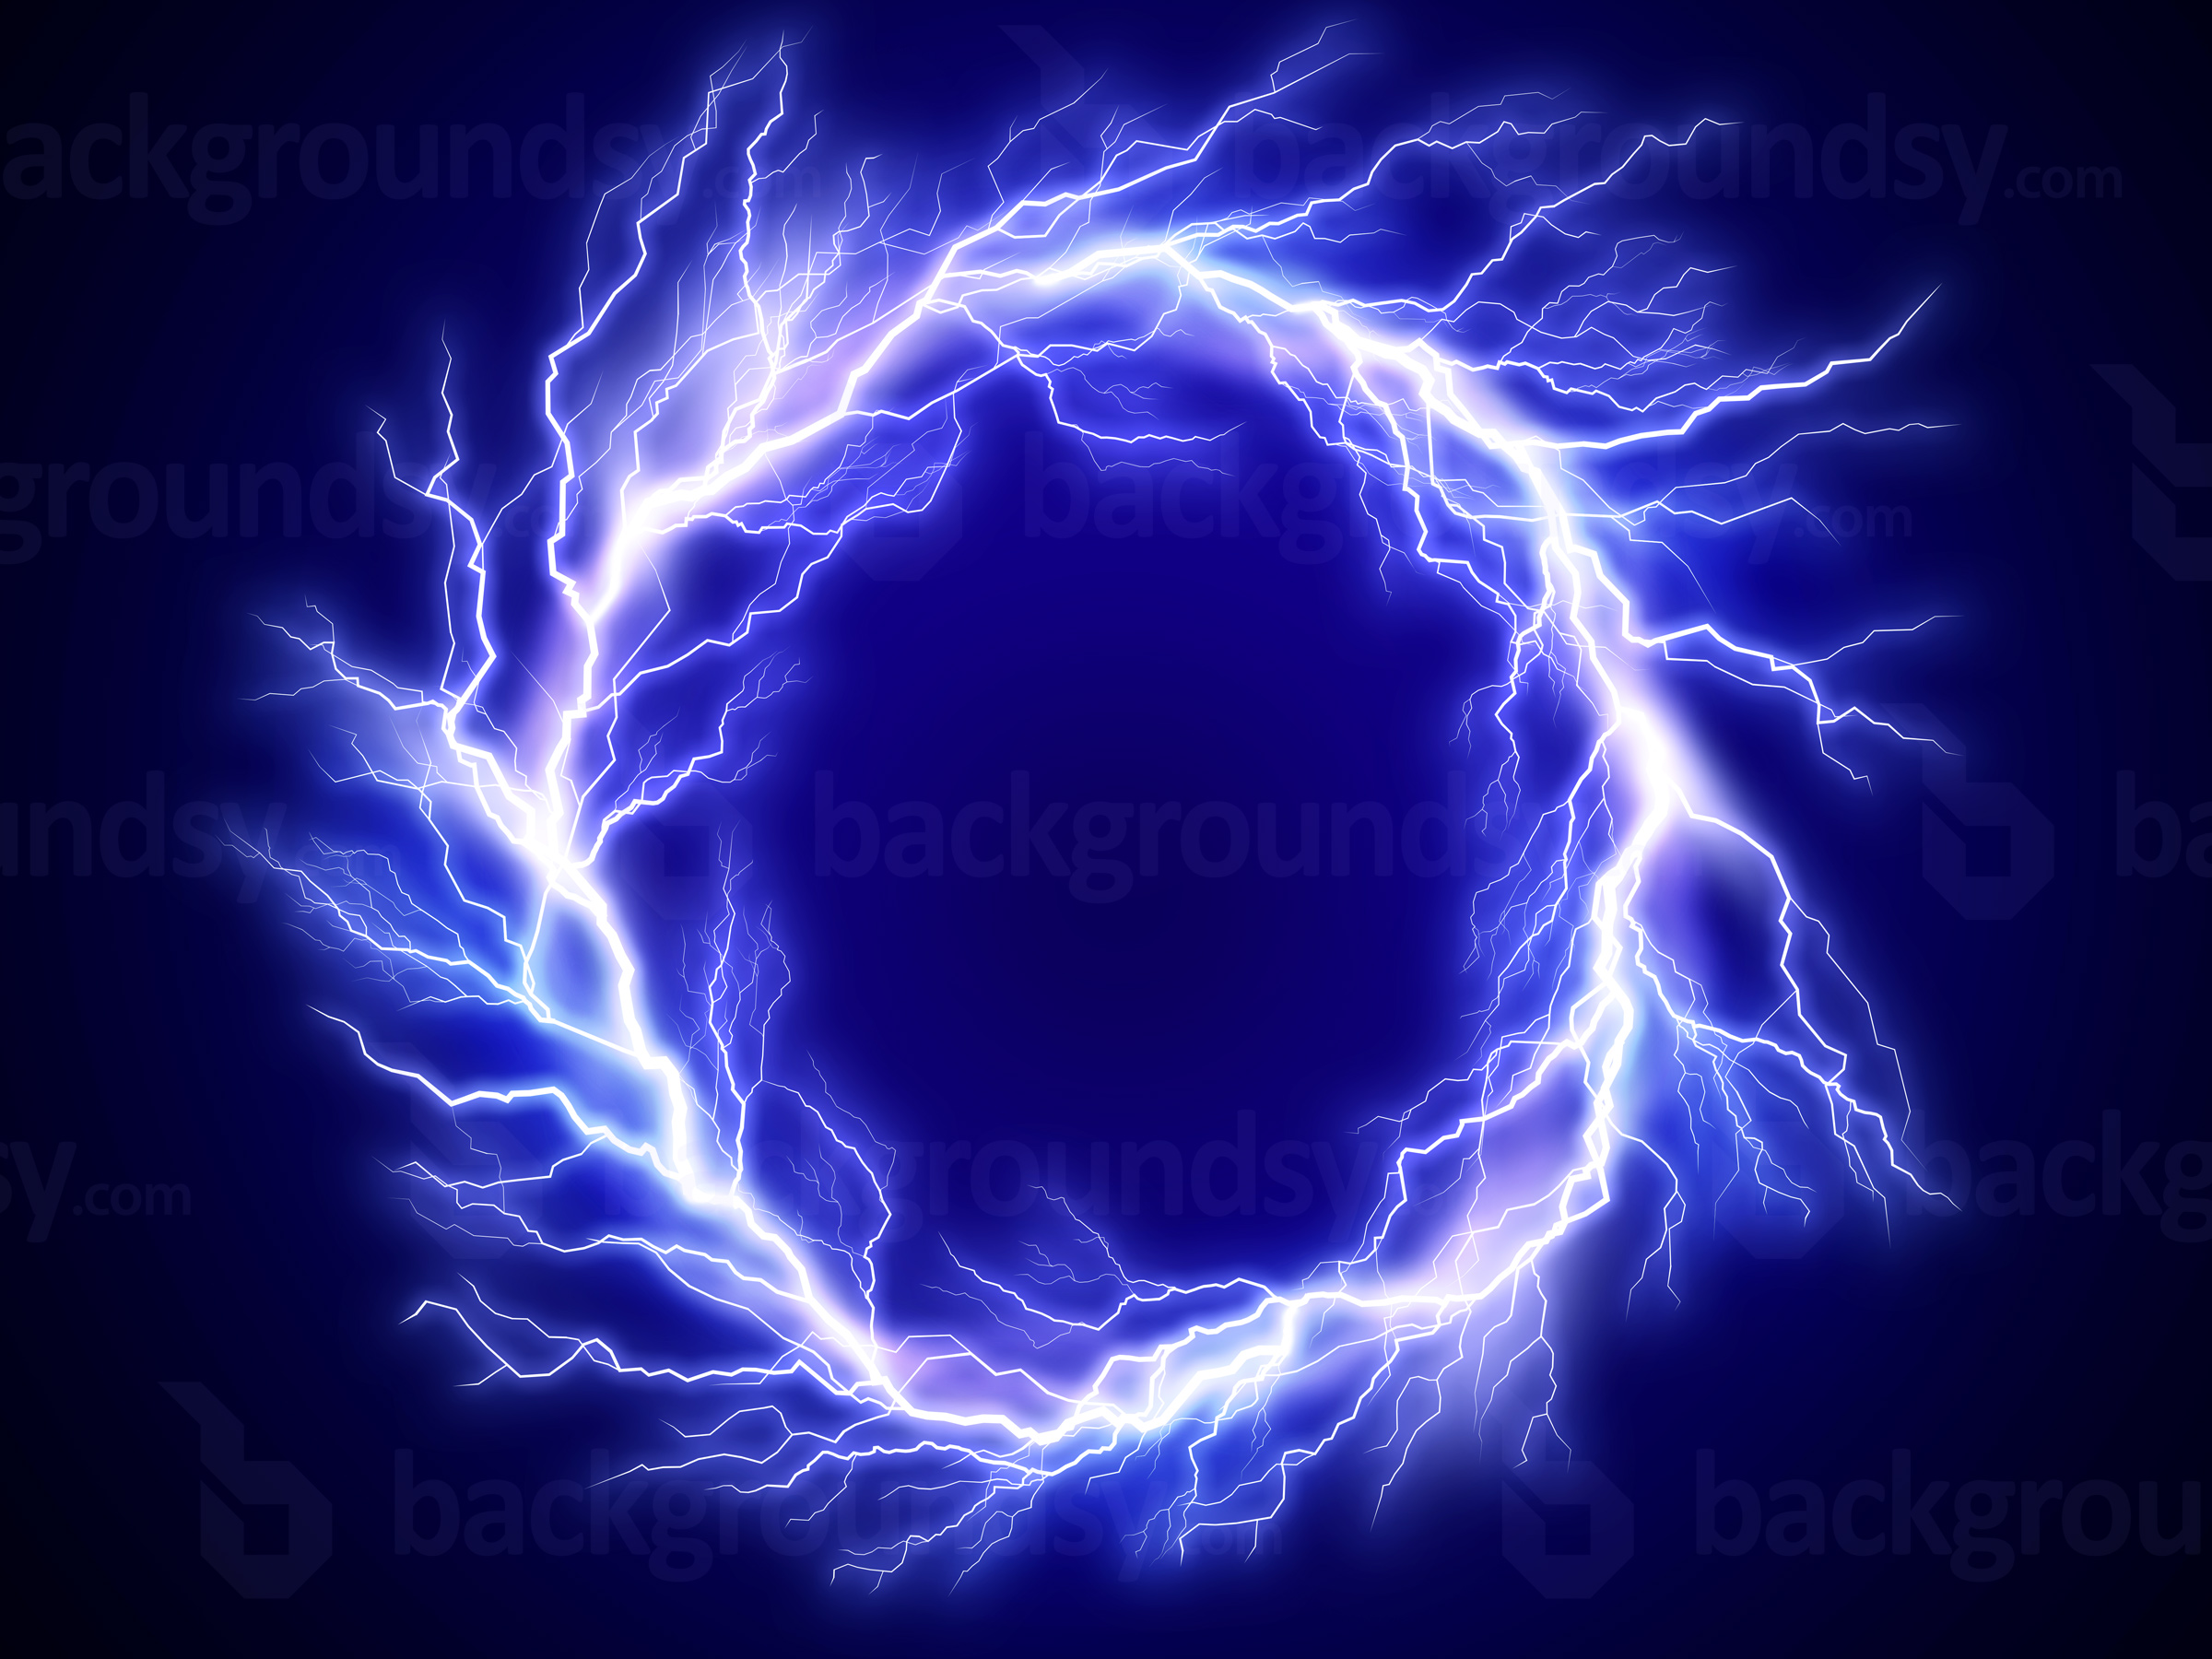 Electricity ring background | Backgroundsy.com